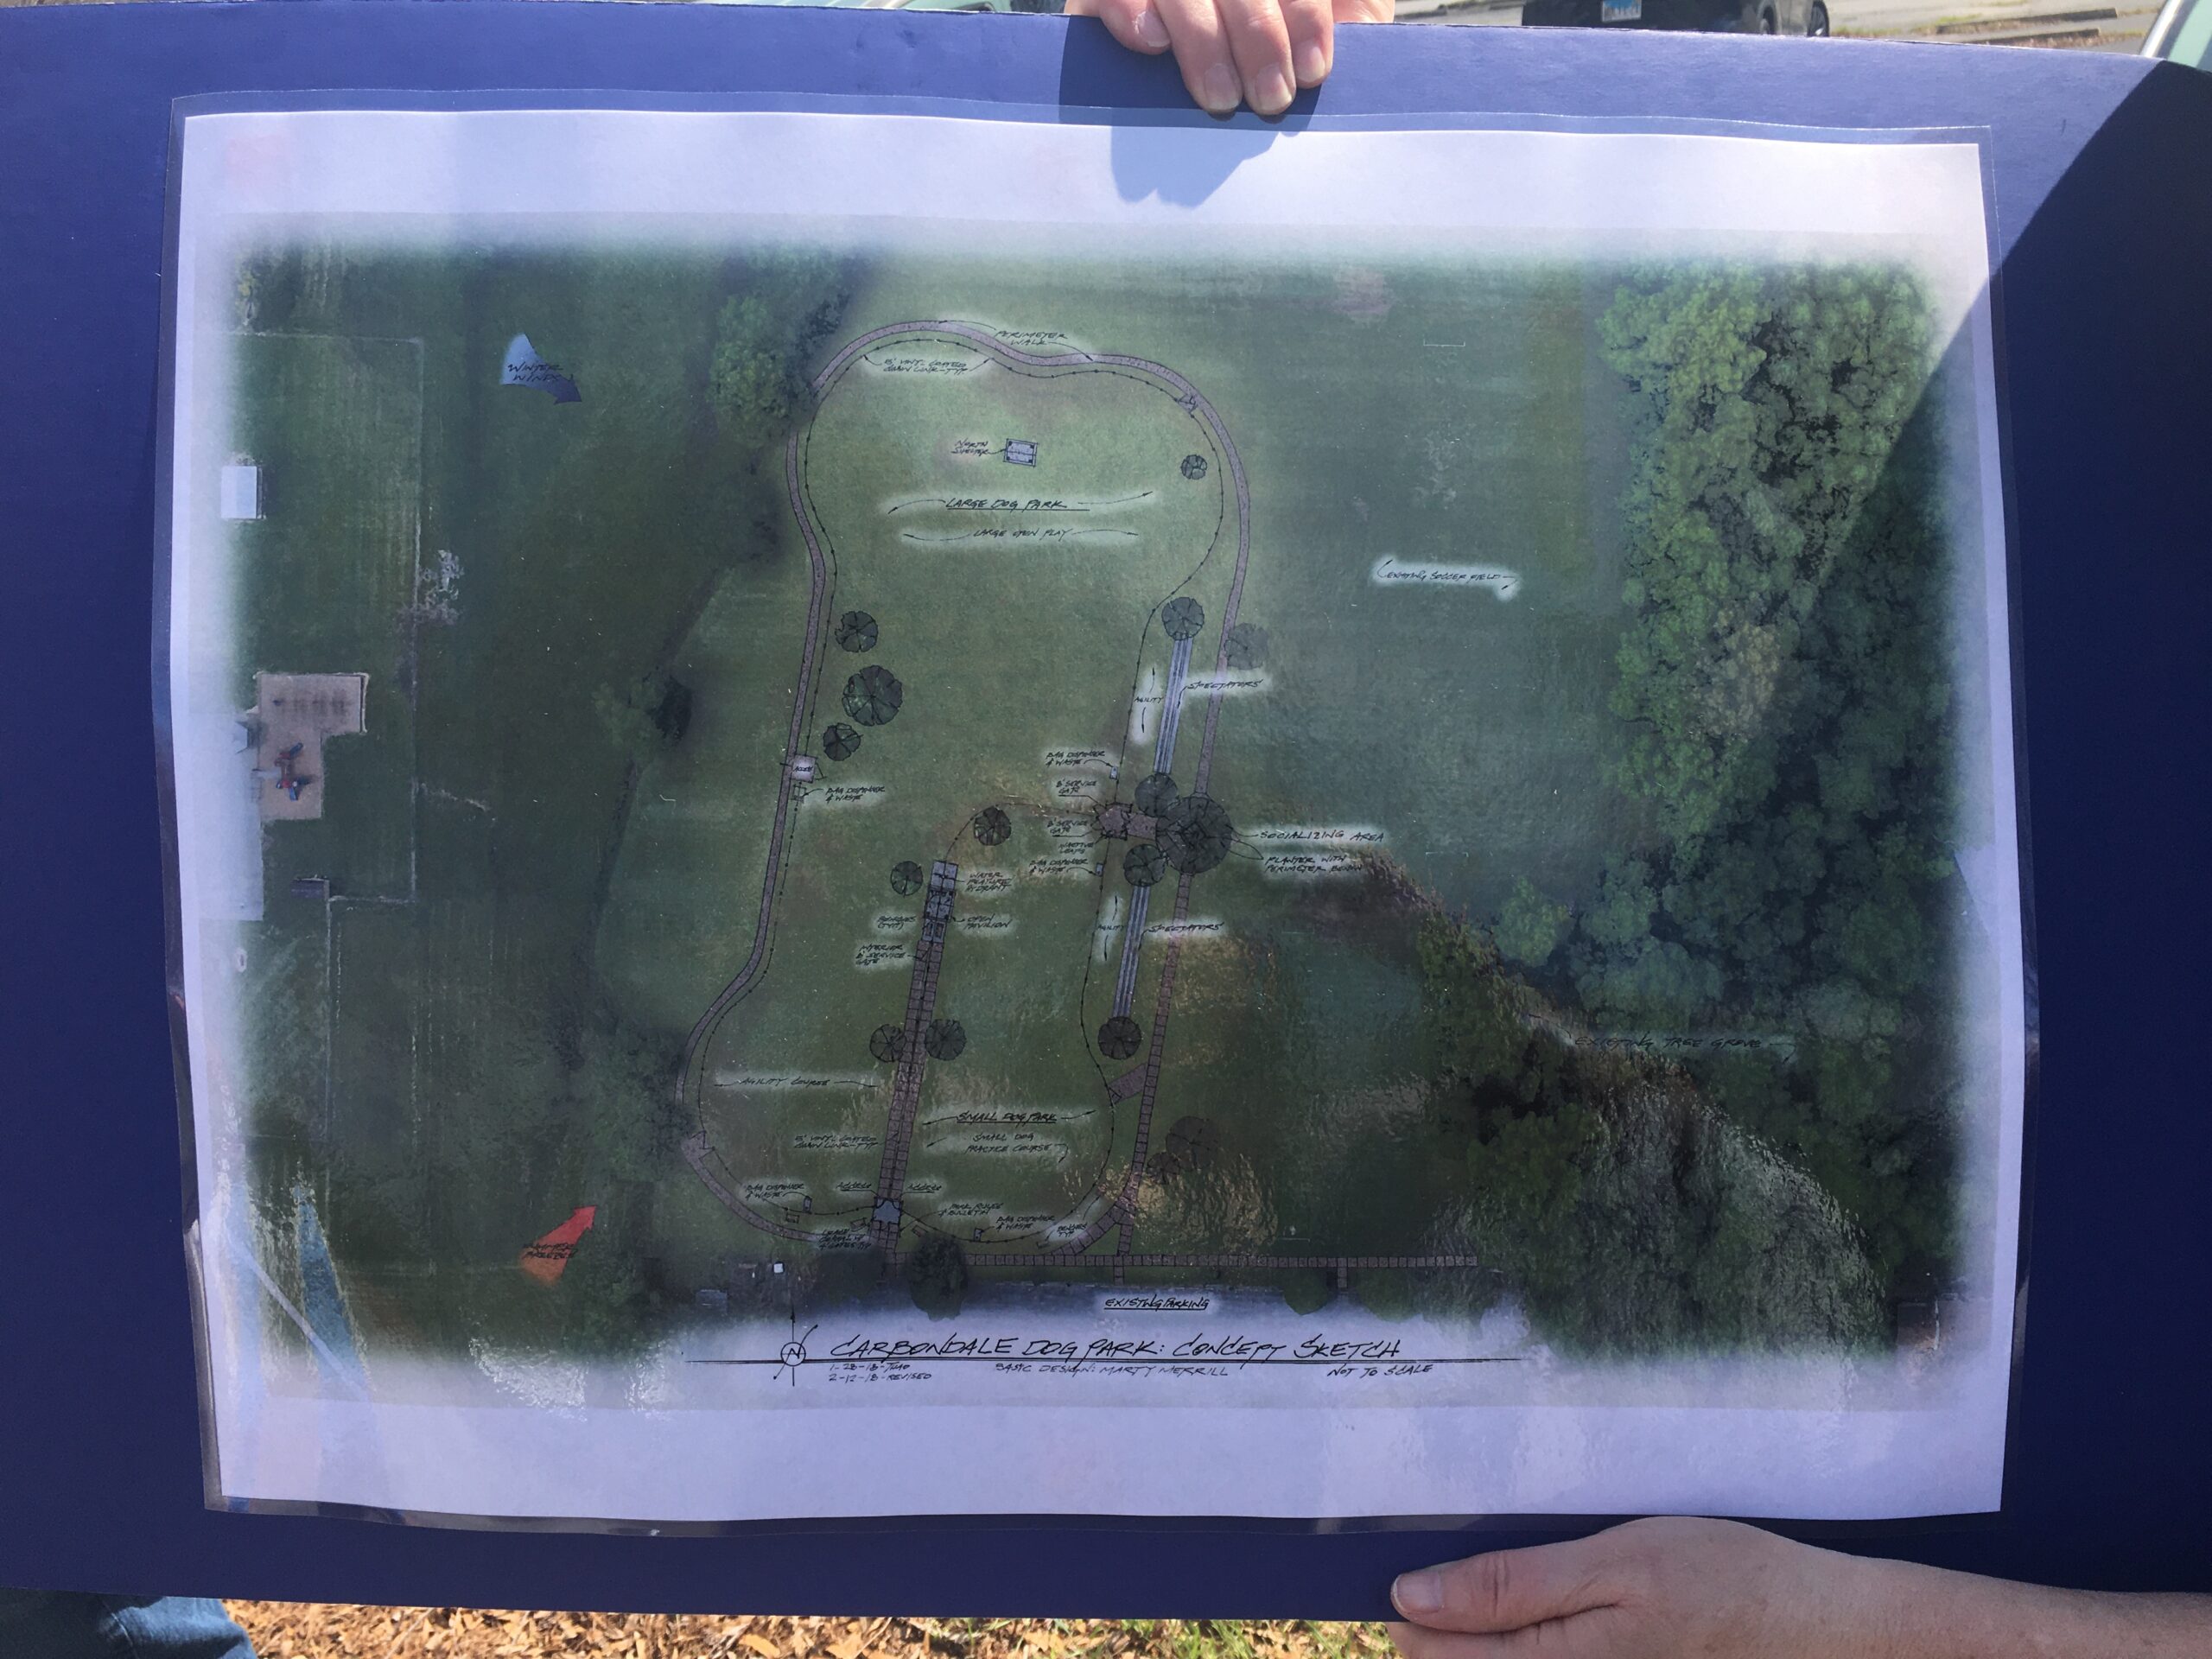 Sketch of the planned Dog Park in Carbondale